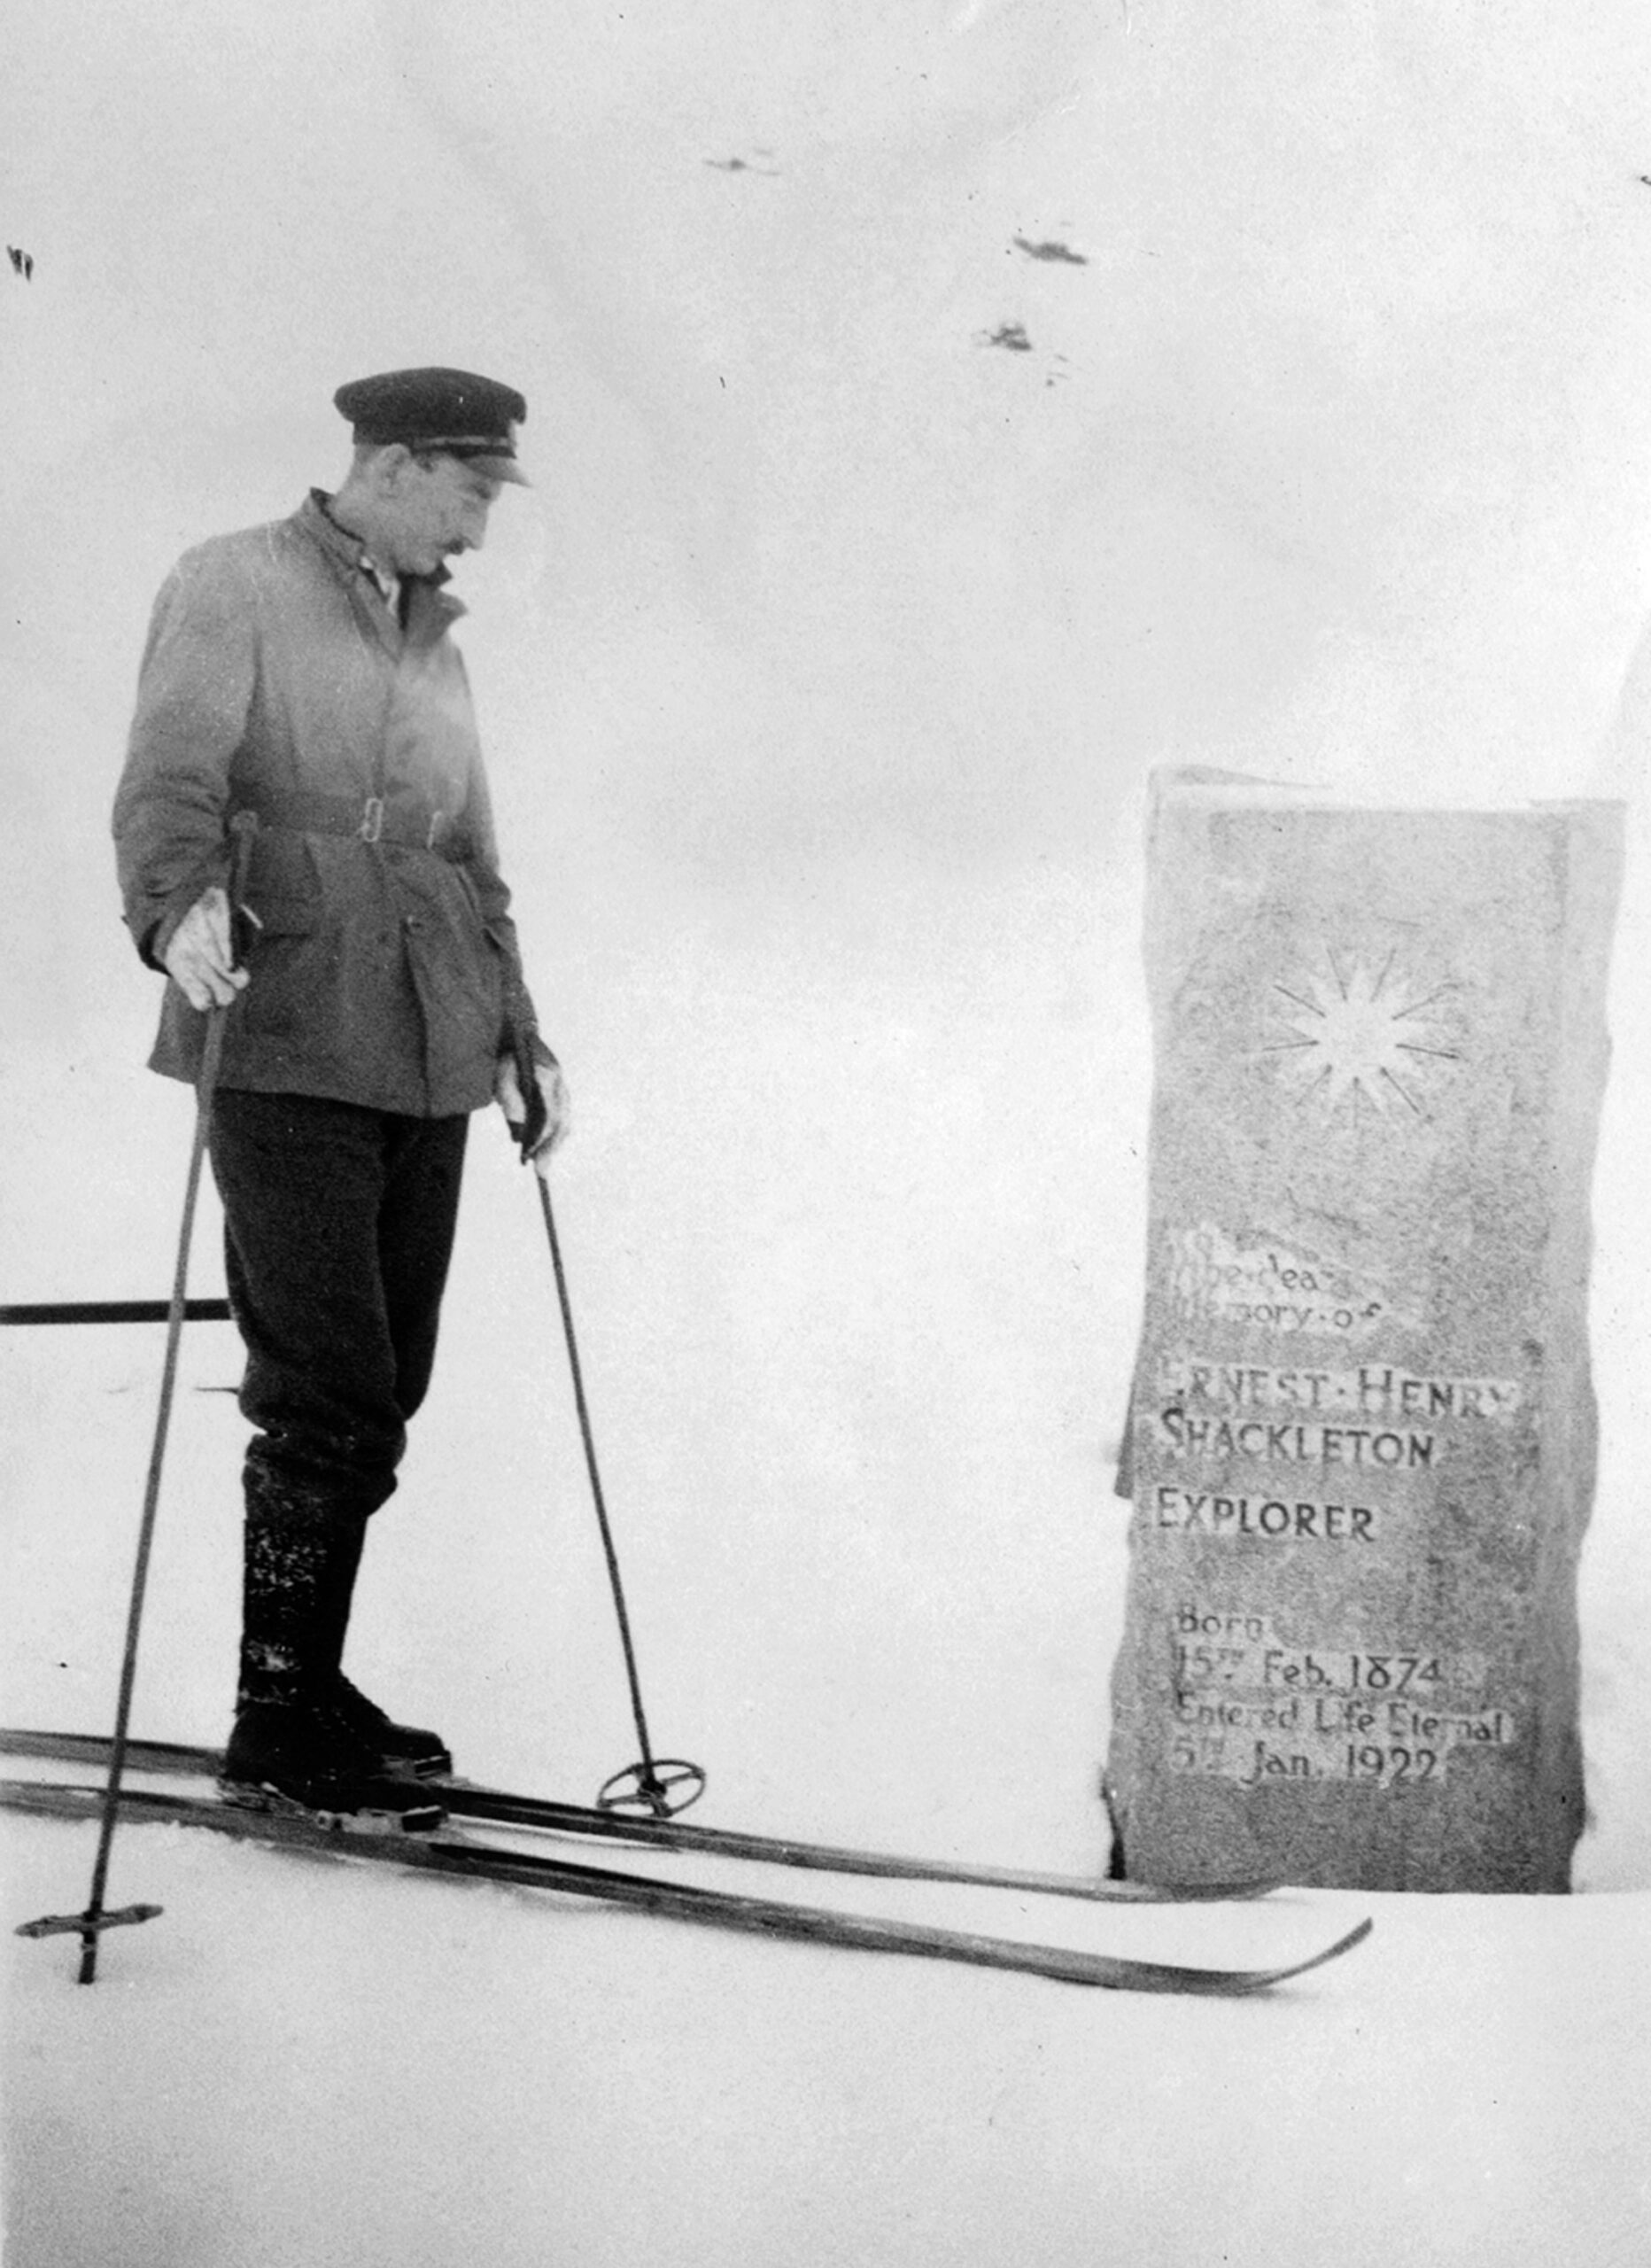 A black and white archive photo showing a grave and a man on skiers next to it.